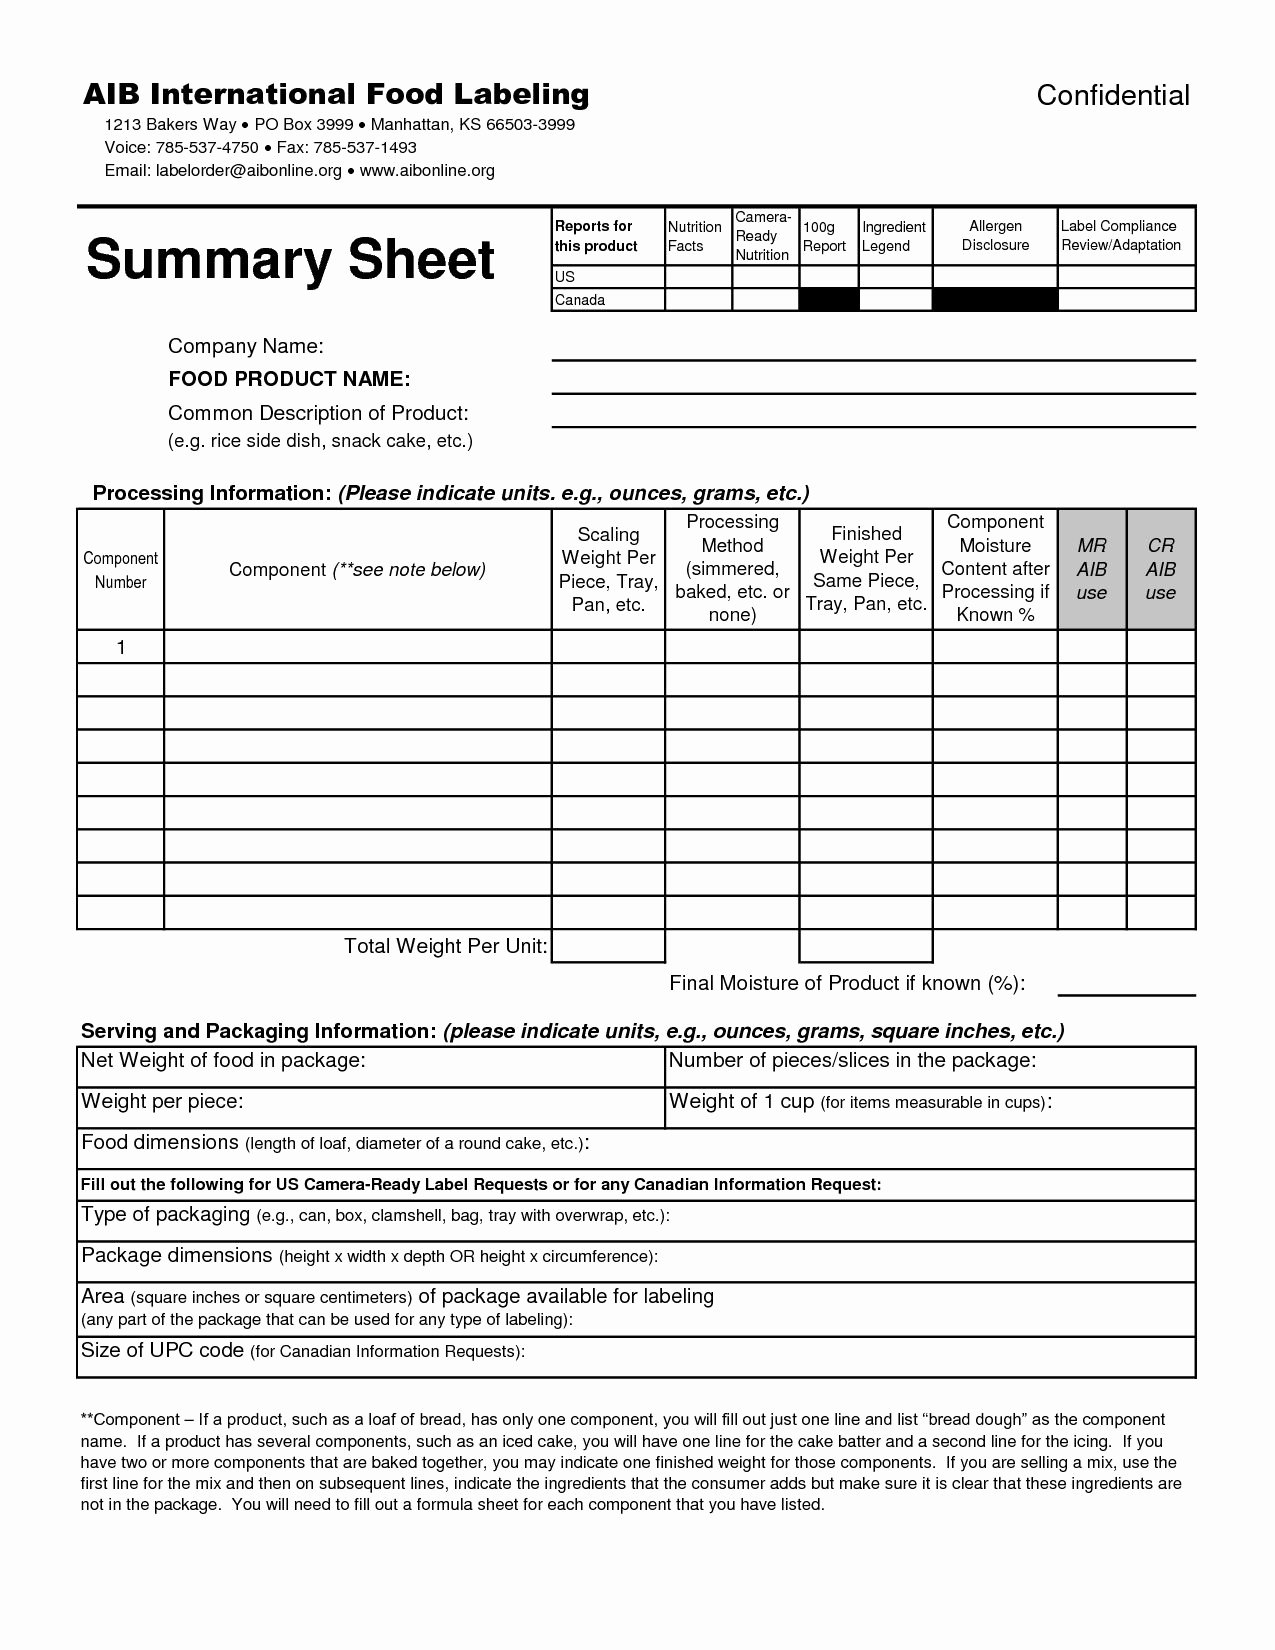 Nutrition Label Worksheet Answers Best Of Nutrition Label Worksheet Answer Key Pdf – Blog Dandk